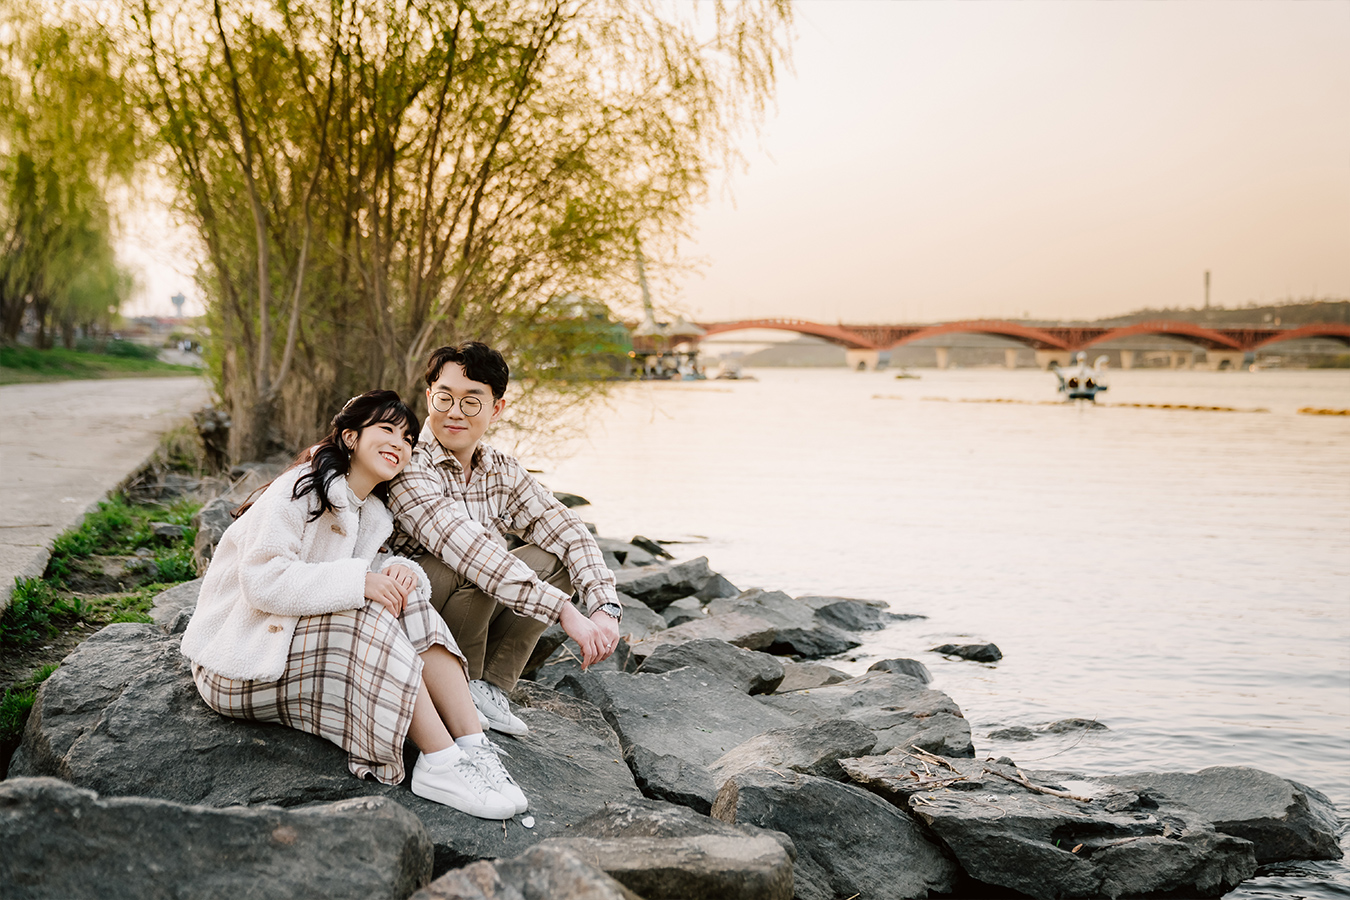 Cute Korea Pre-Wedding Photoshoot Under the Cherry Blossoms Trees by Jungyeol on OneThreeOneFour 17